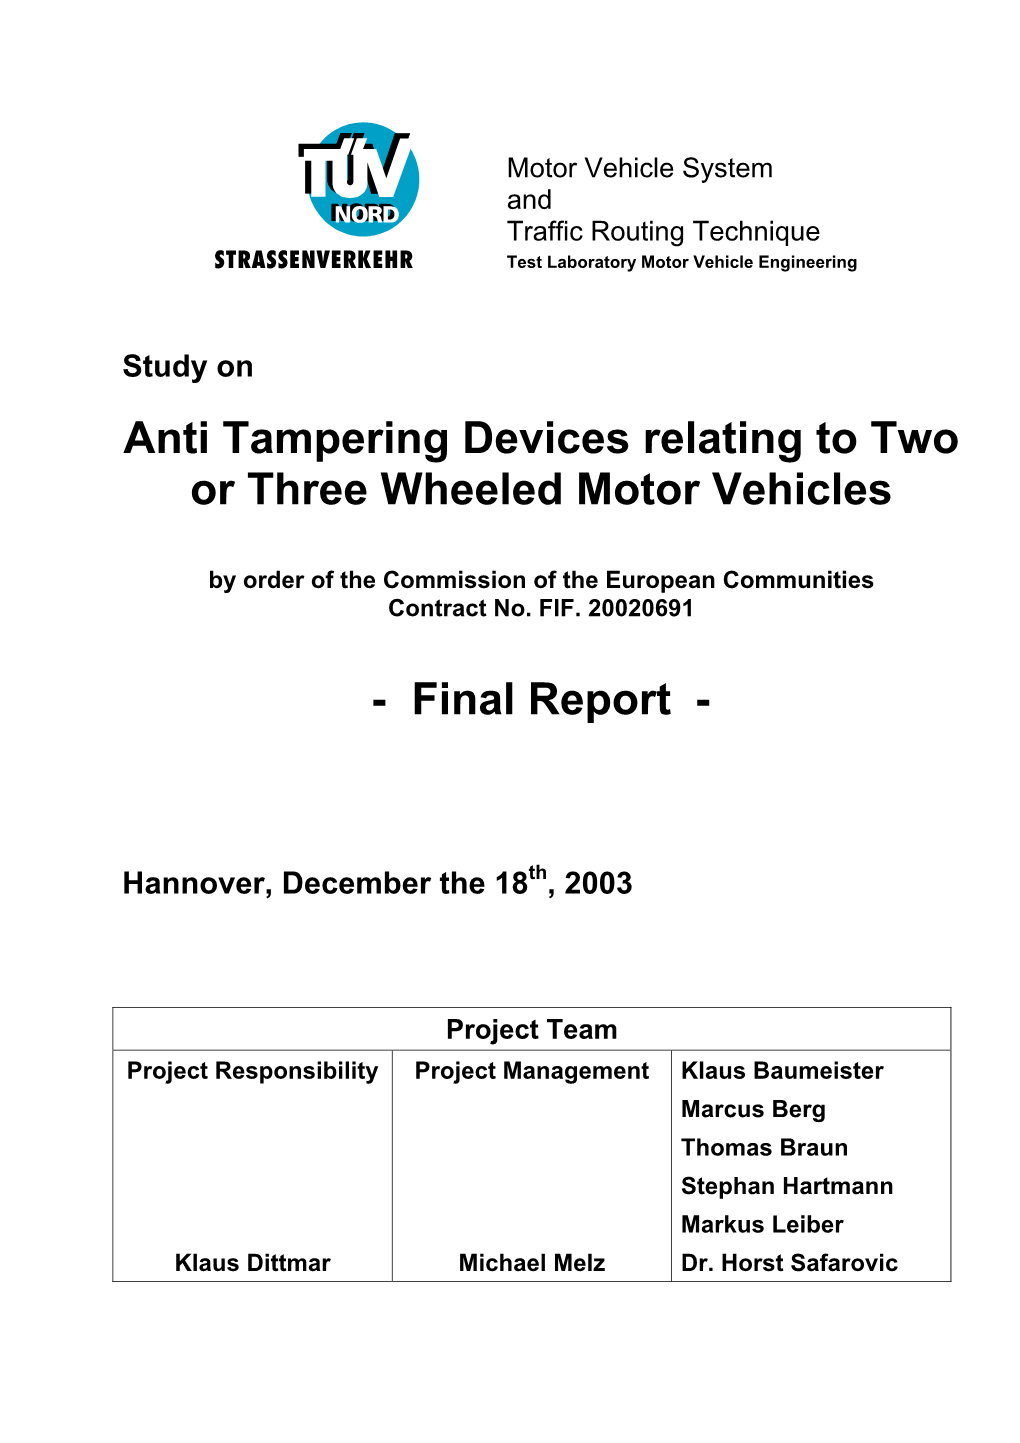 Final Report on Anti Tampering Devices